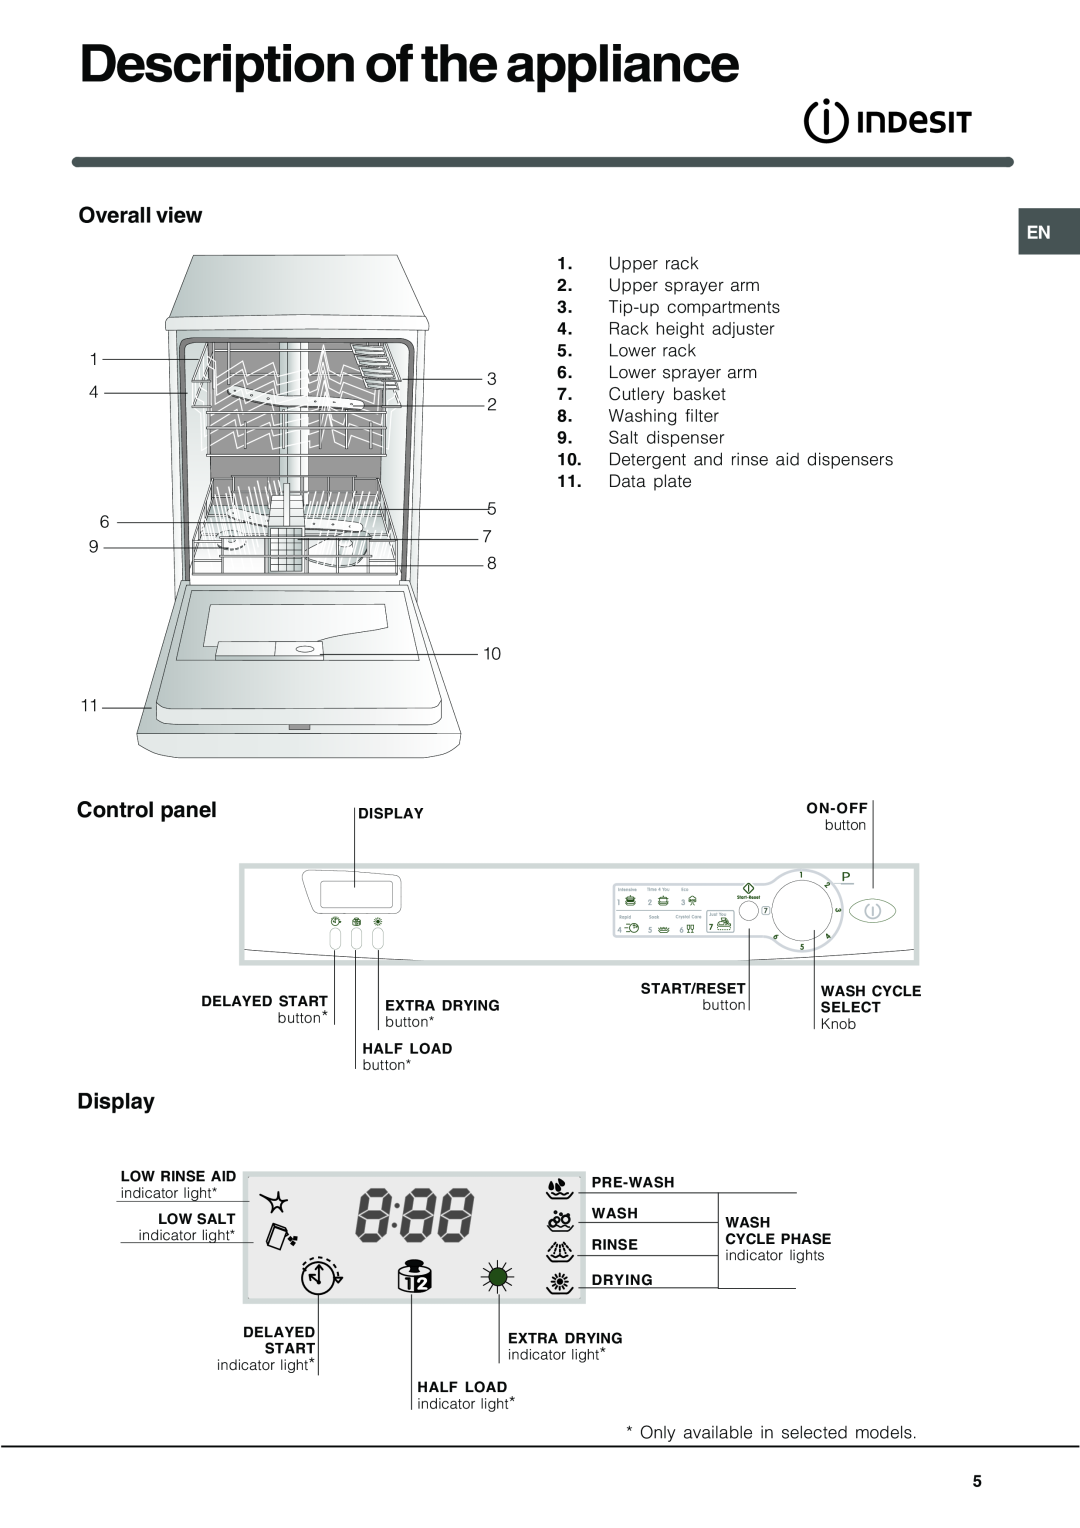 Indesit IDE 750 manual Description of the appliance, Overall view, Control panel, Display 